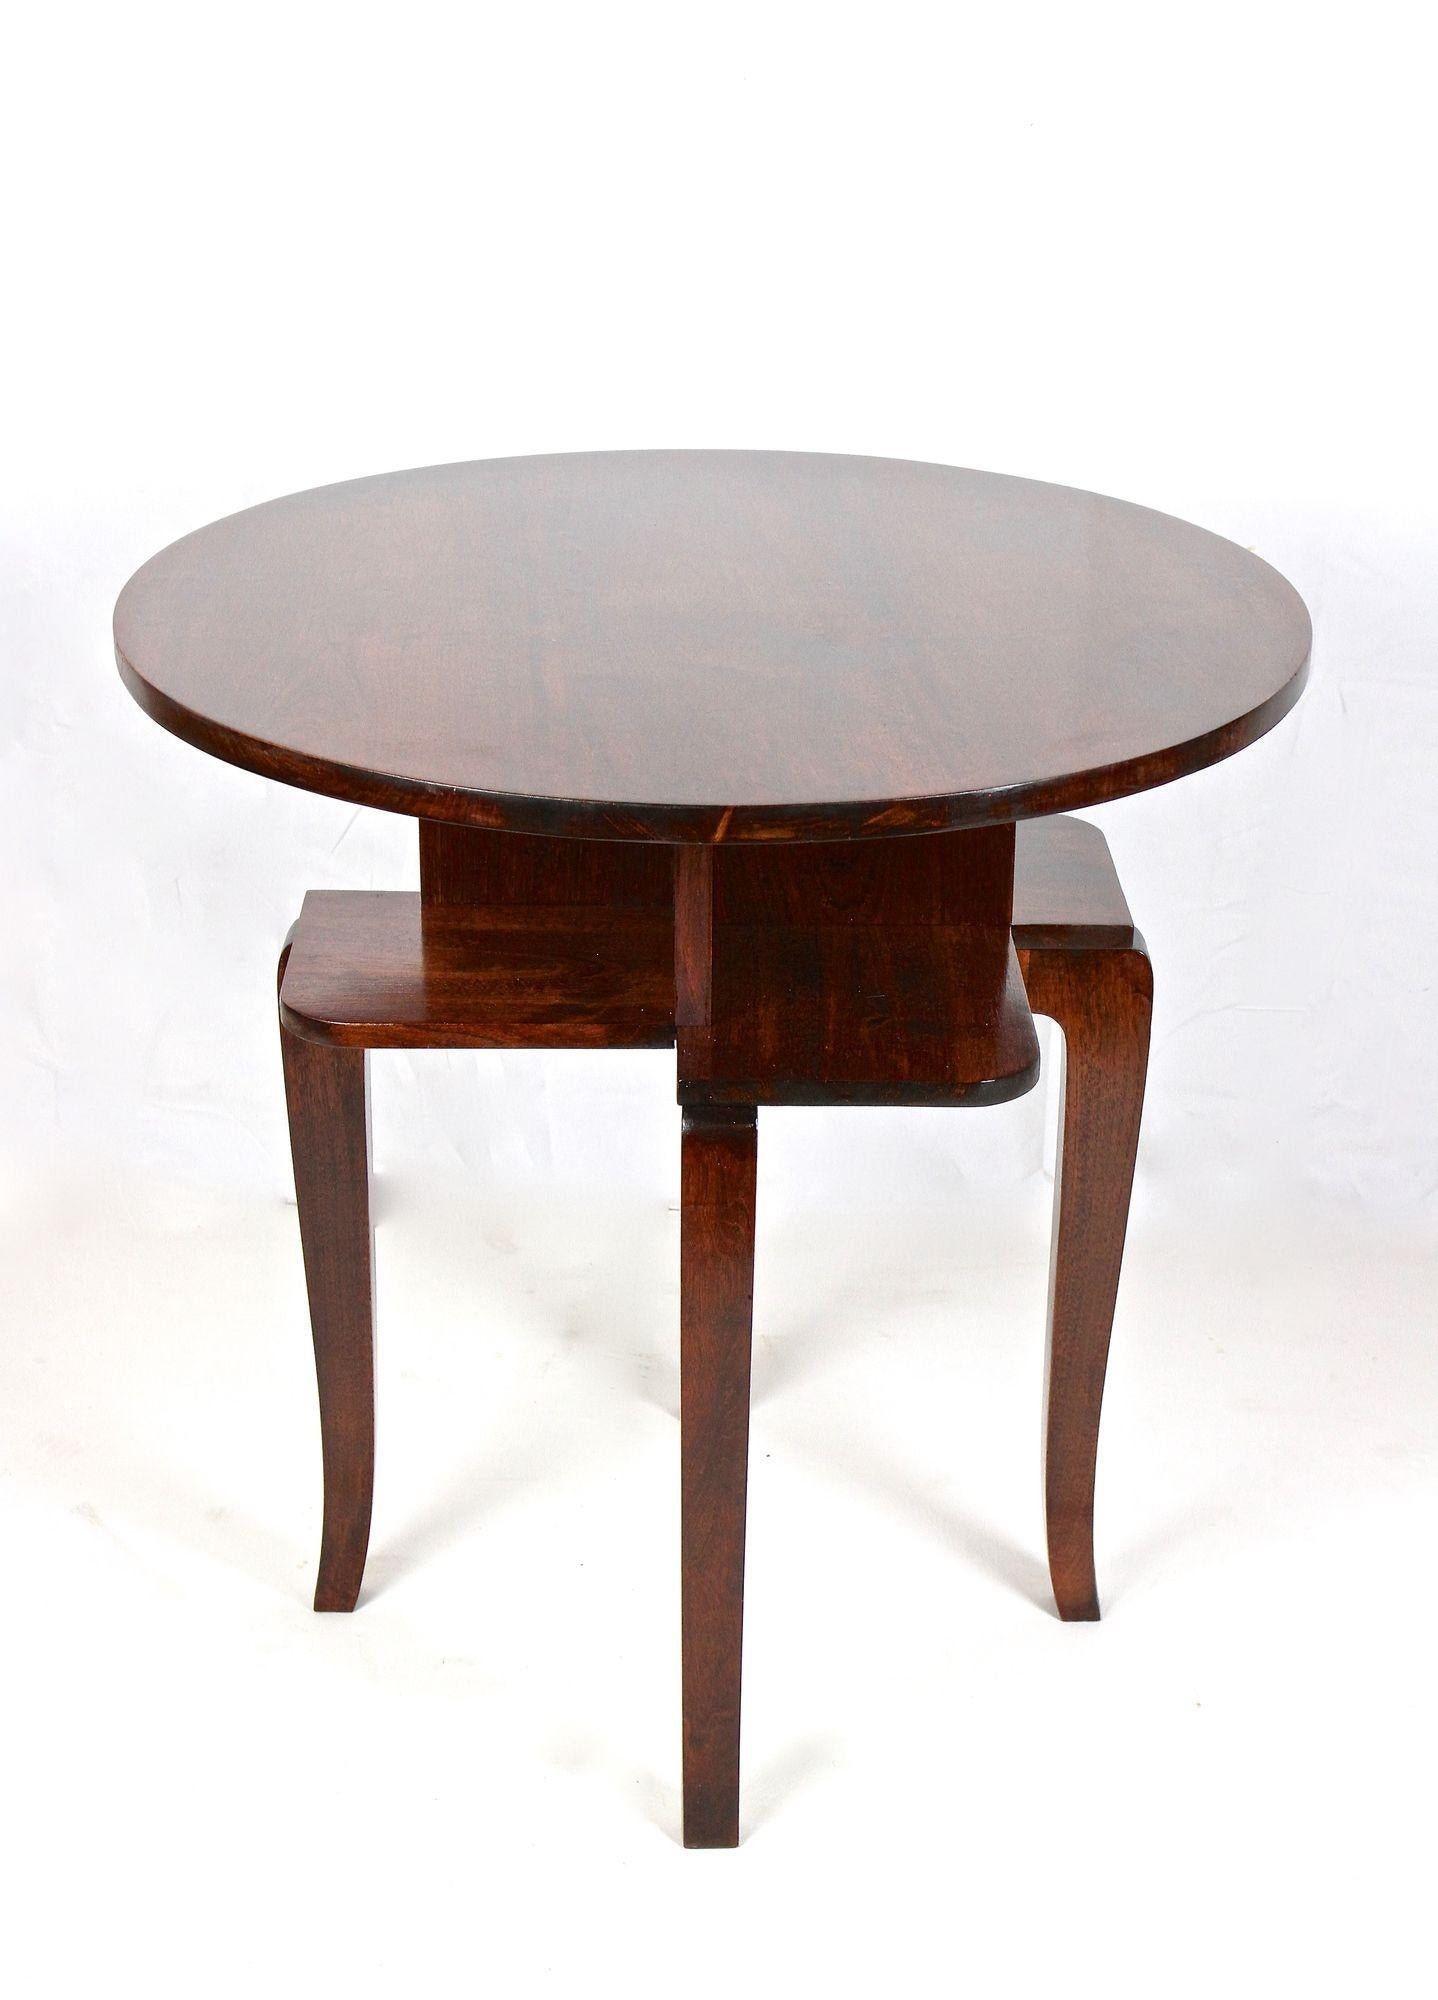 20th Century Round Art Deco Bentwood Side Table/ Coffee Table, Mahogany Style, AT ca. 1920